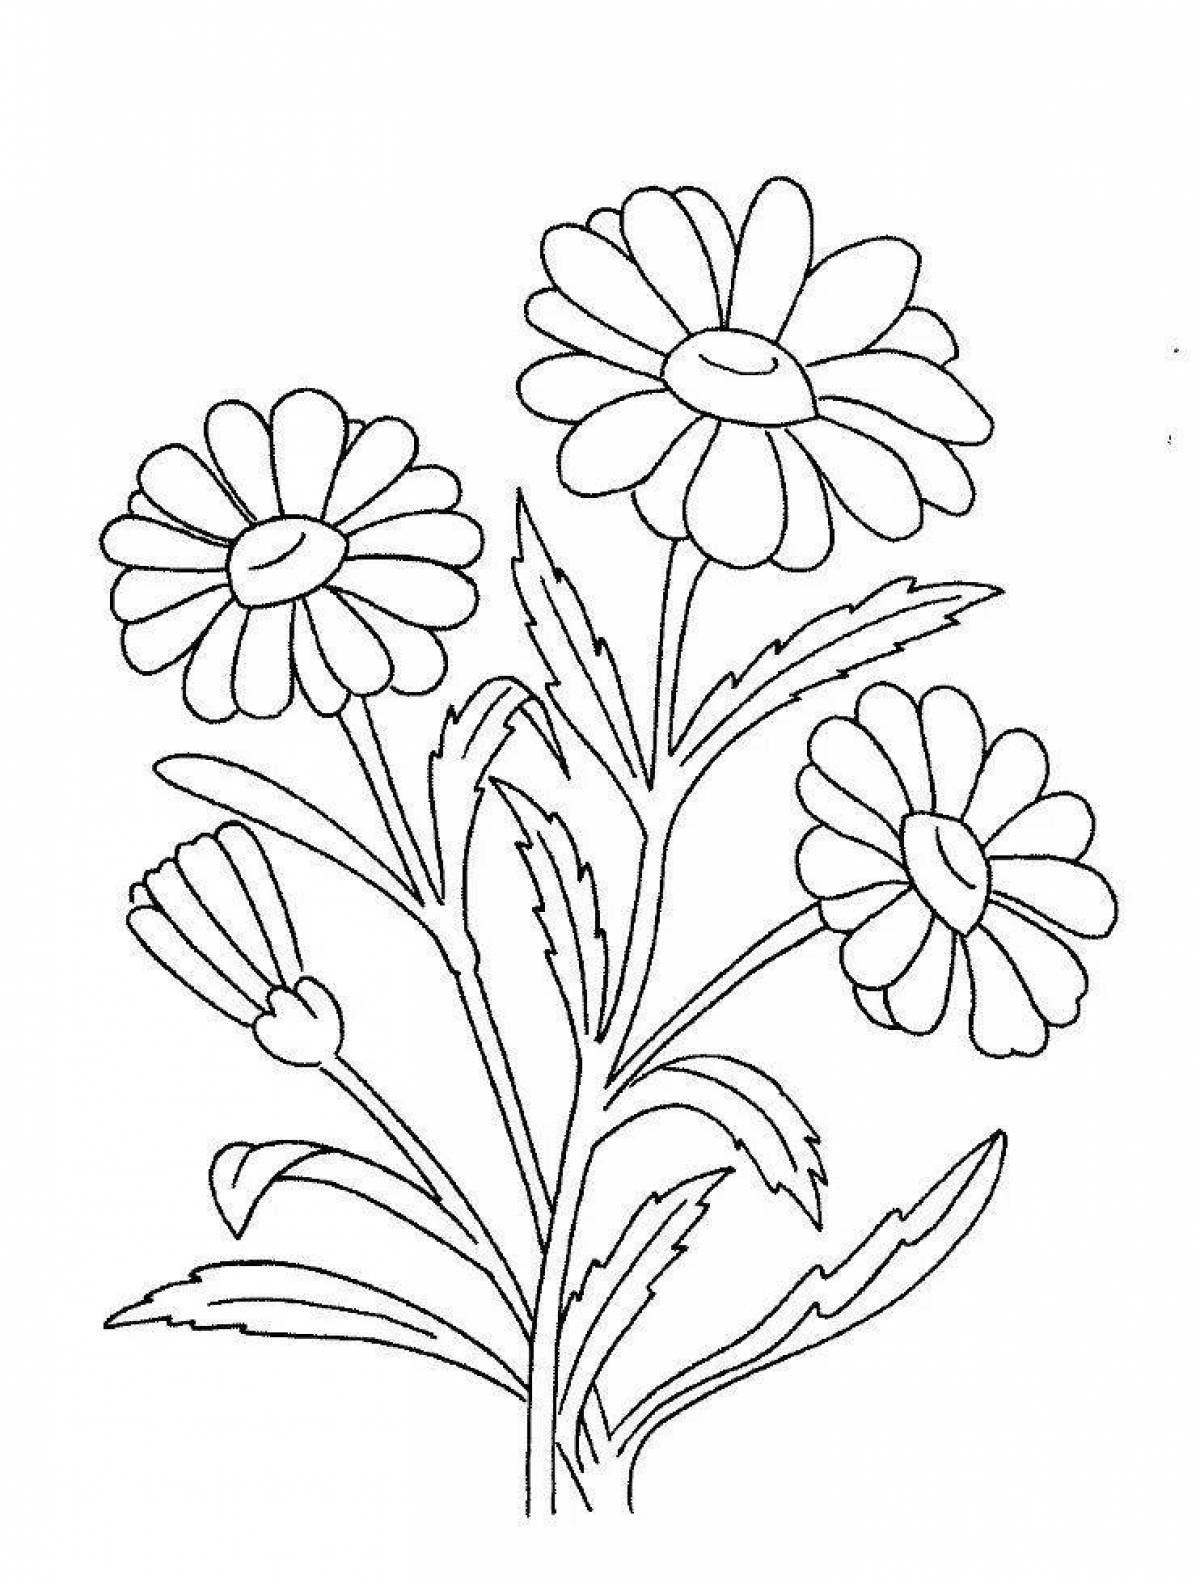 Refreshing chamomile flower coloring page